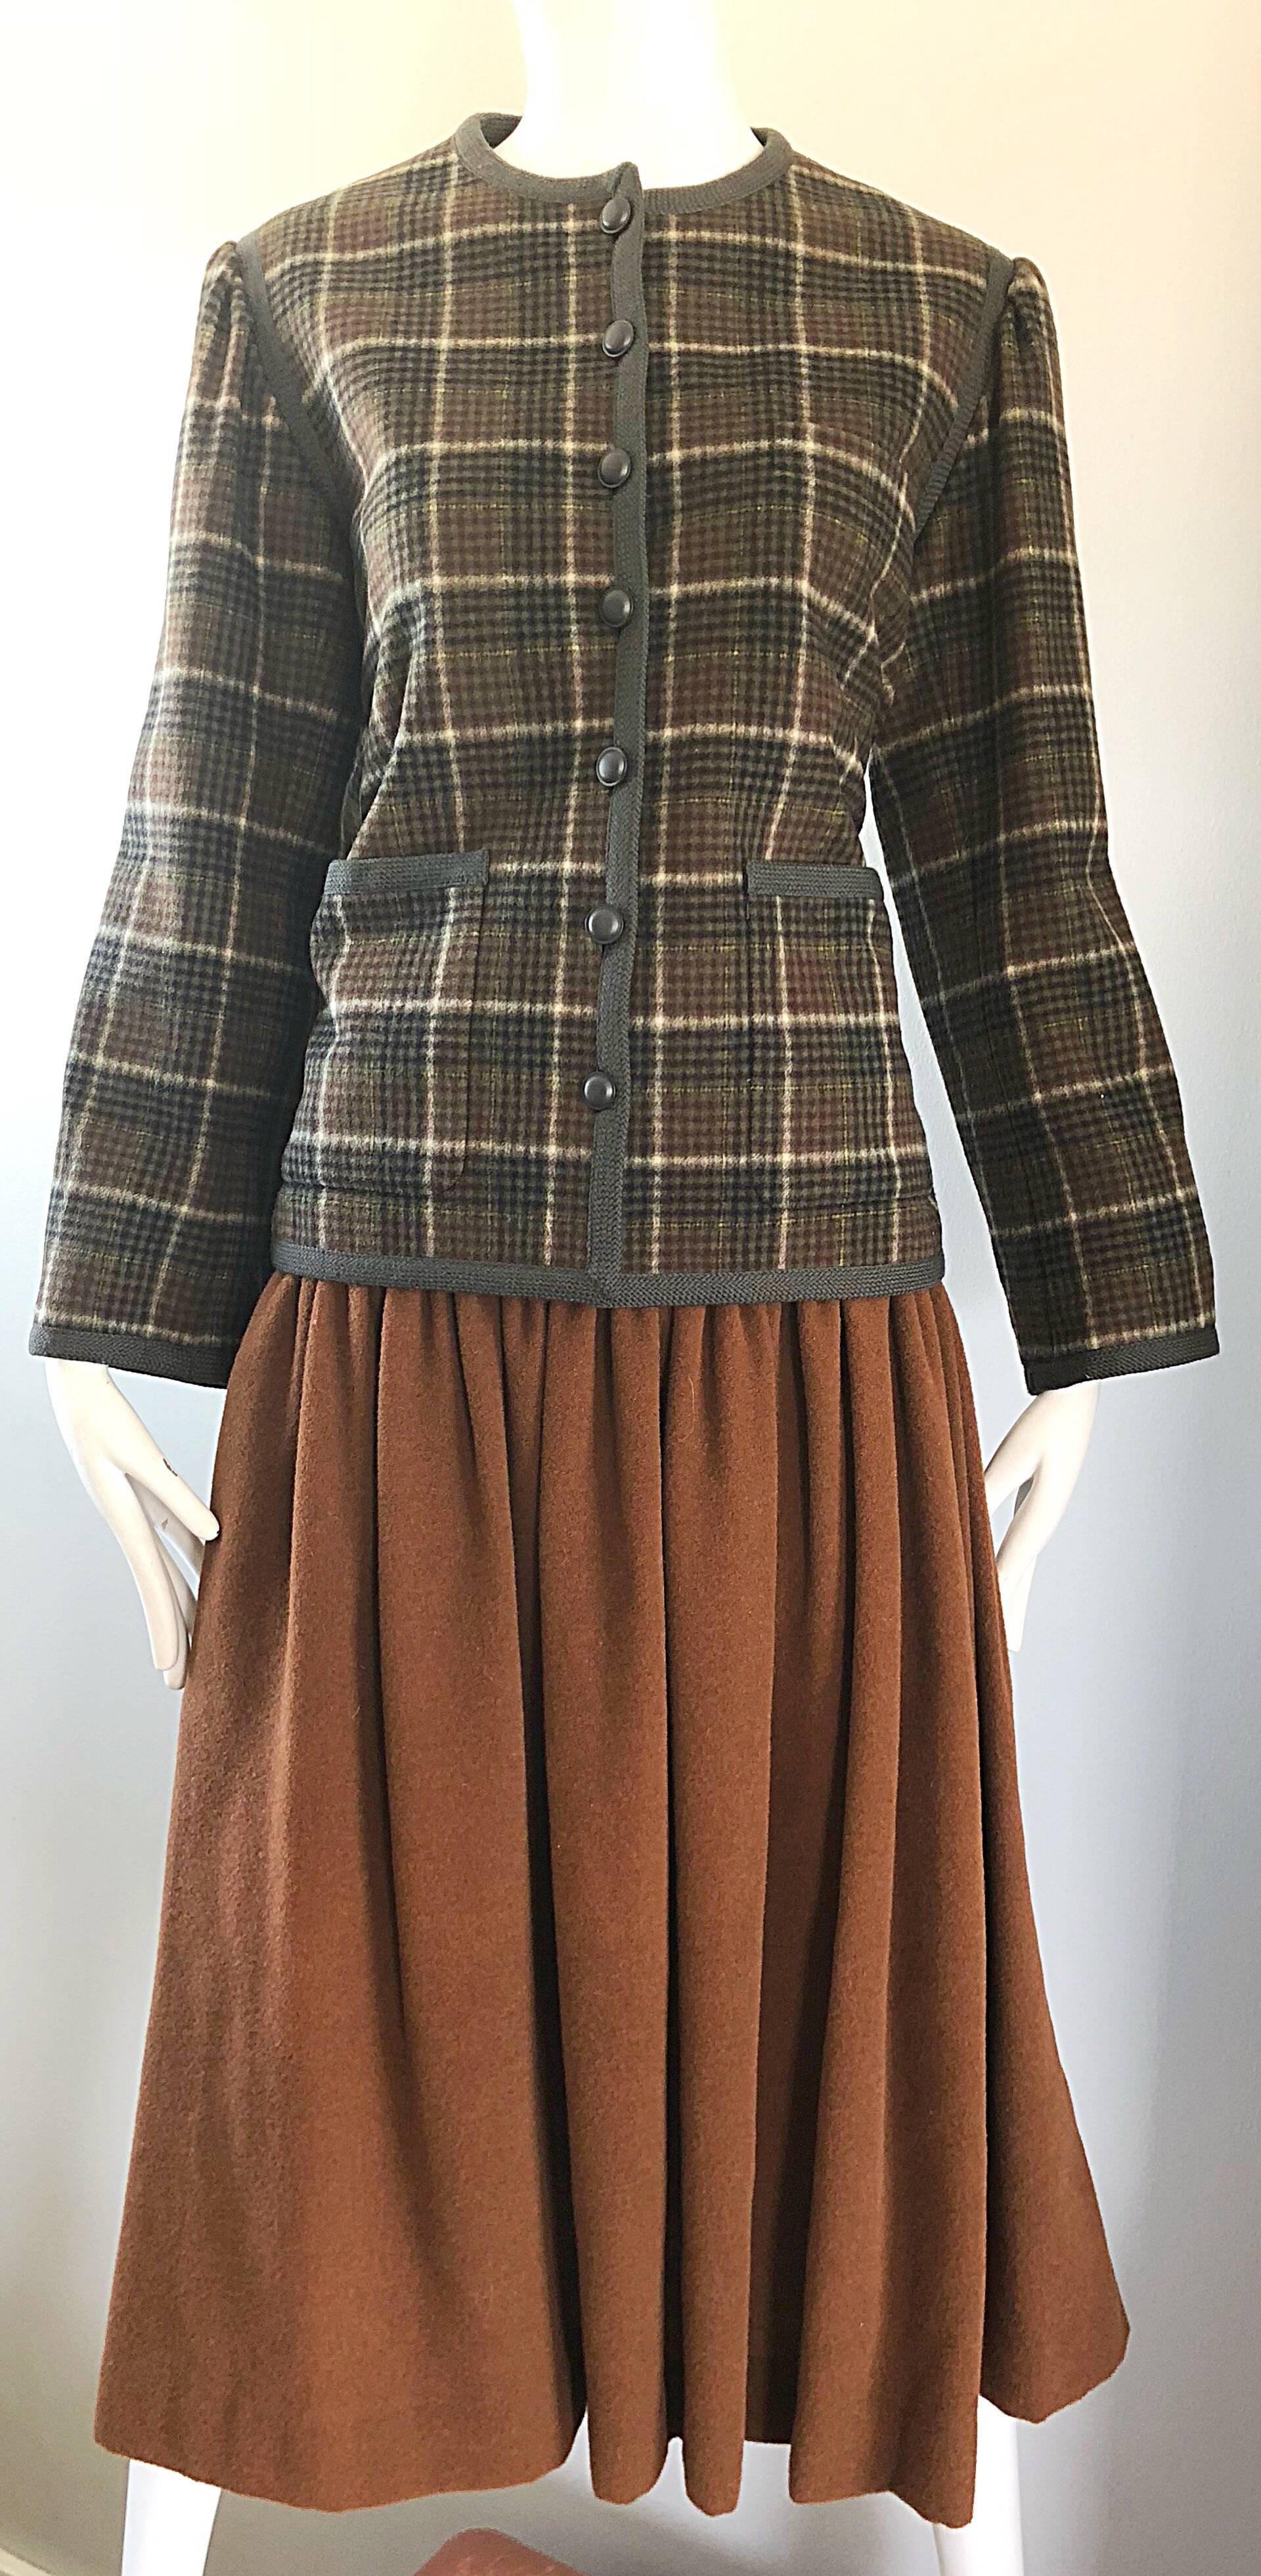 Women's Vintage Yves Saint Laurent Russian Collection 1976 Jacket and Skirt Suit YSL 70s For Sale